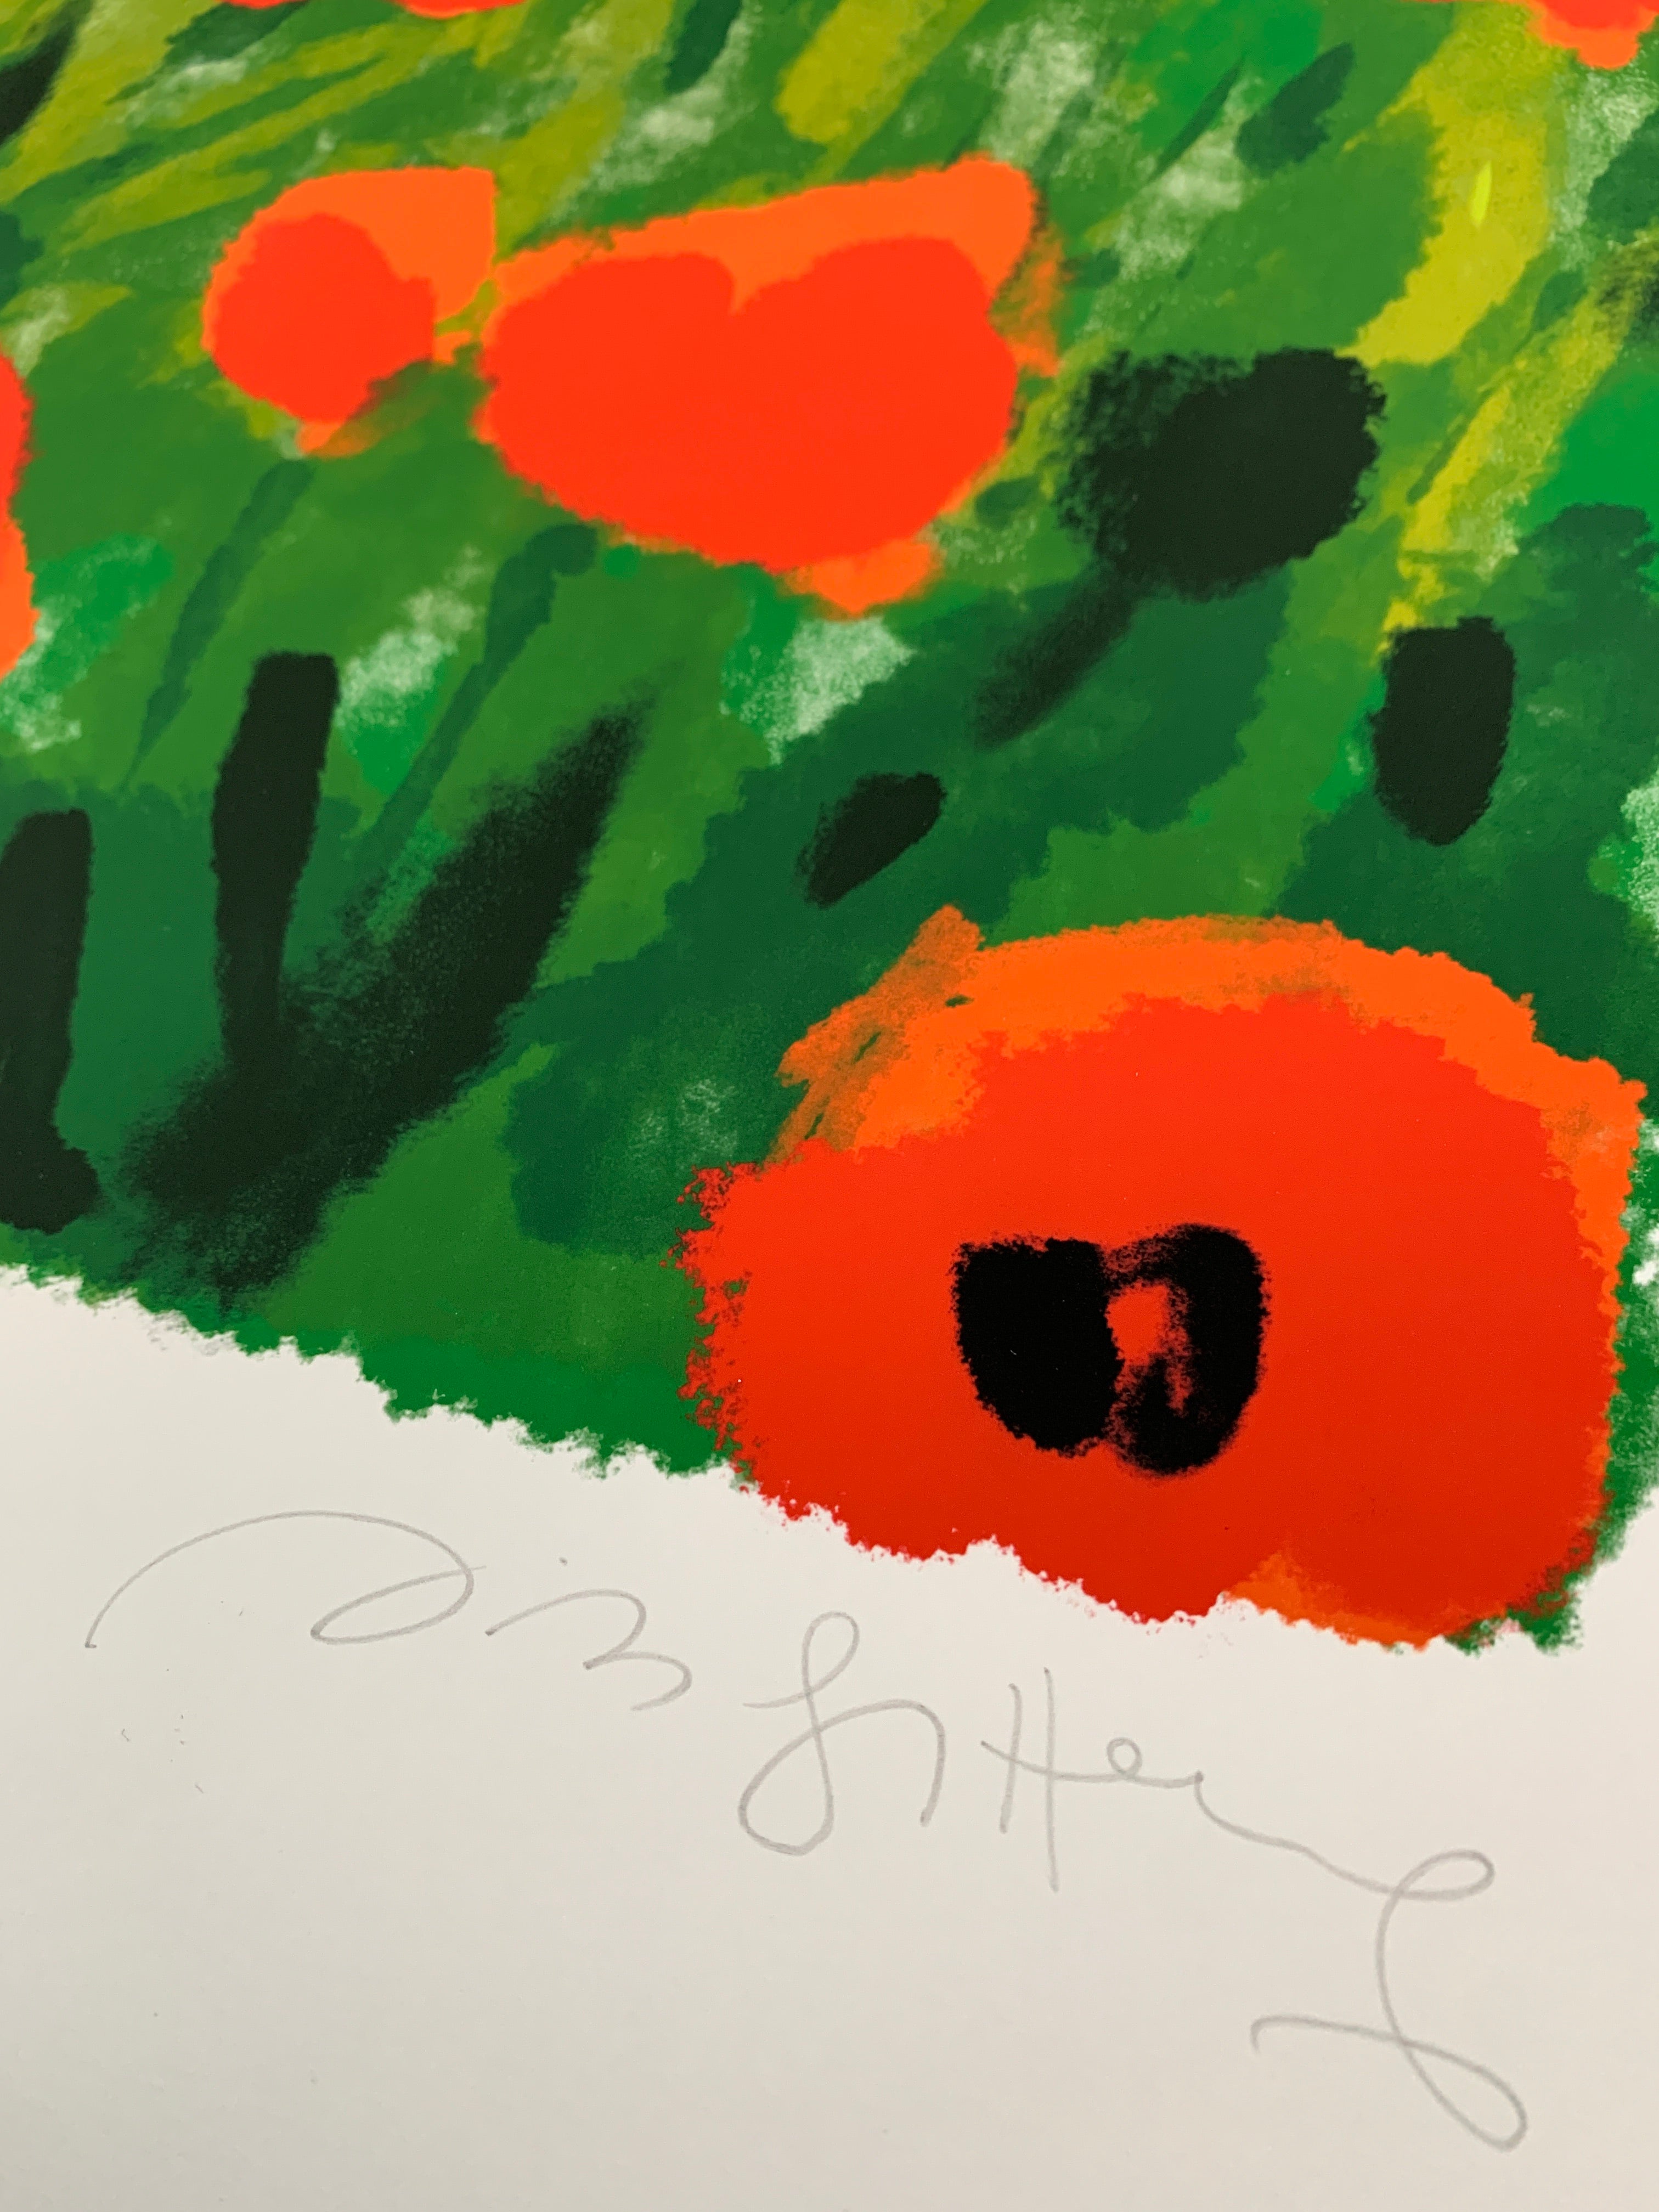 ESTHER'S NOTEBOOKS <br> "The Poppies"<br> <font color="red"> Signed by Riad Sattouf </font>